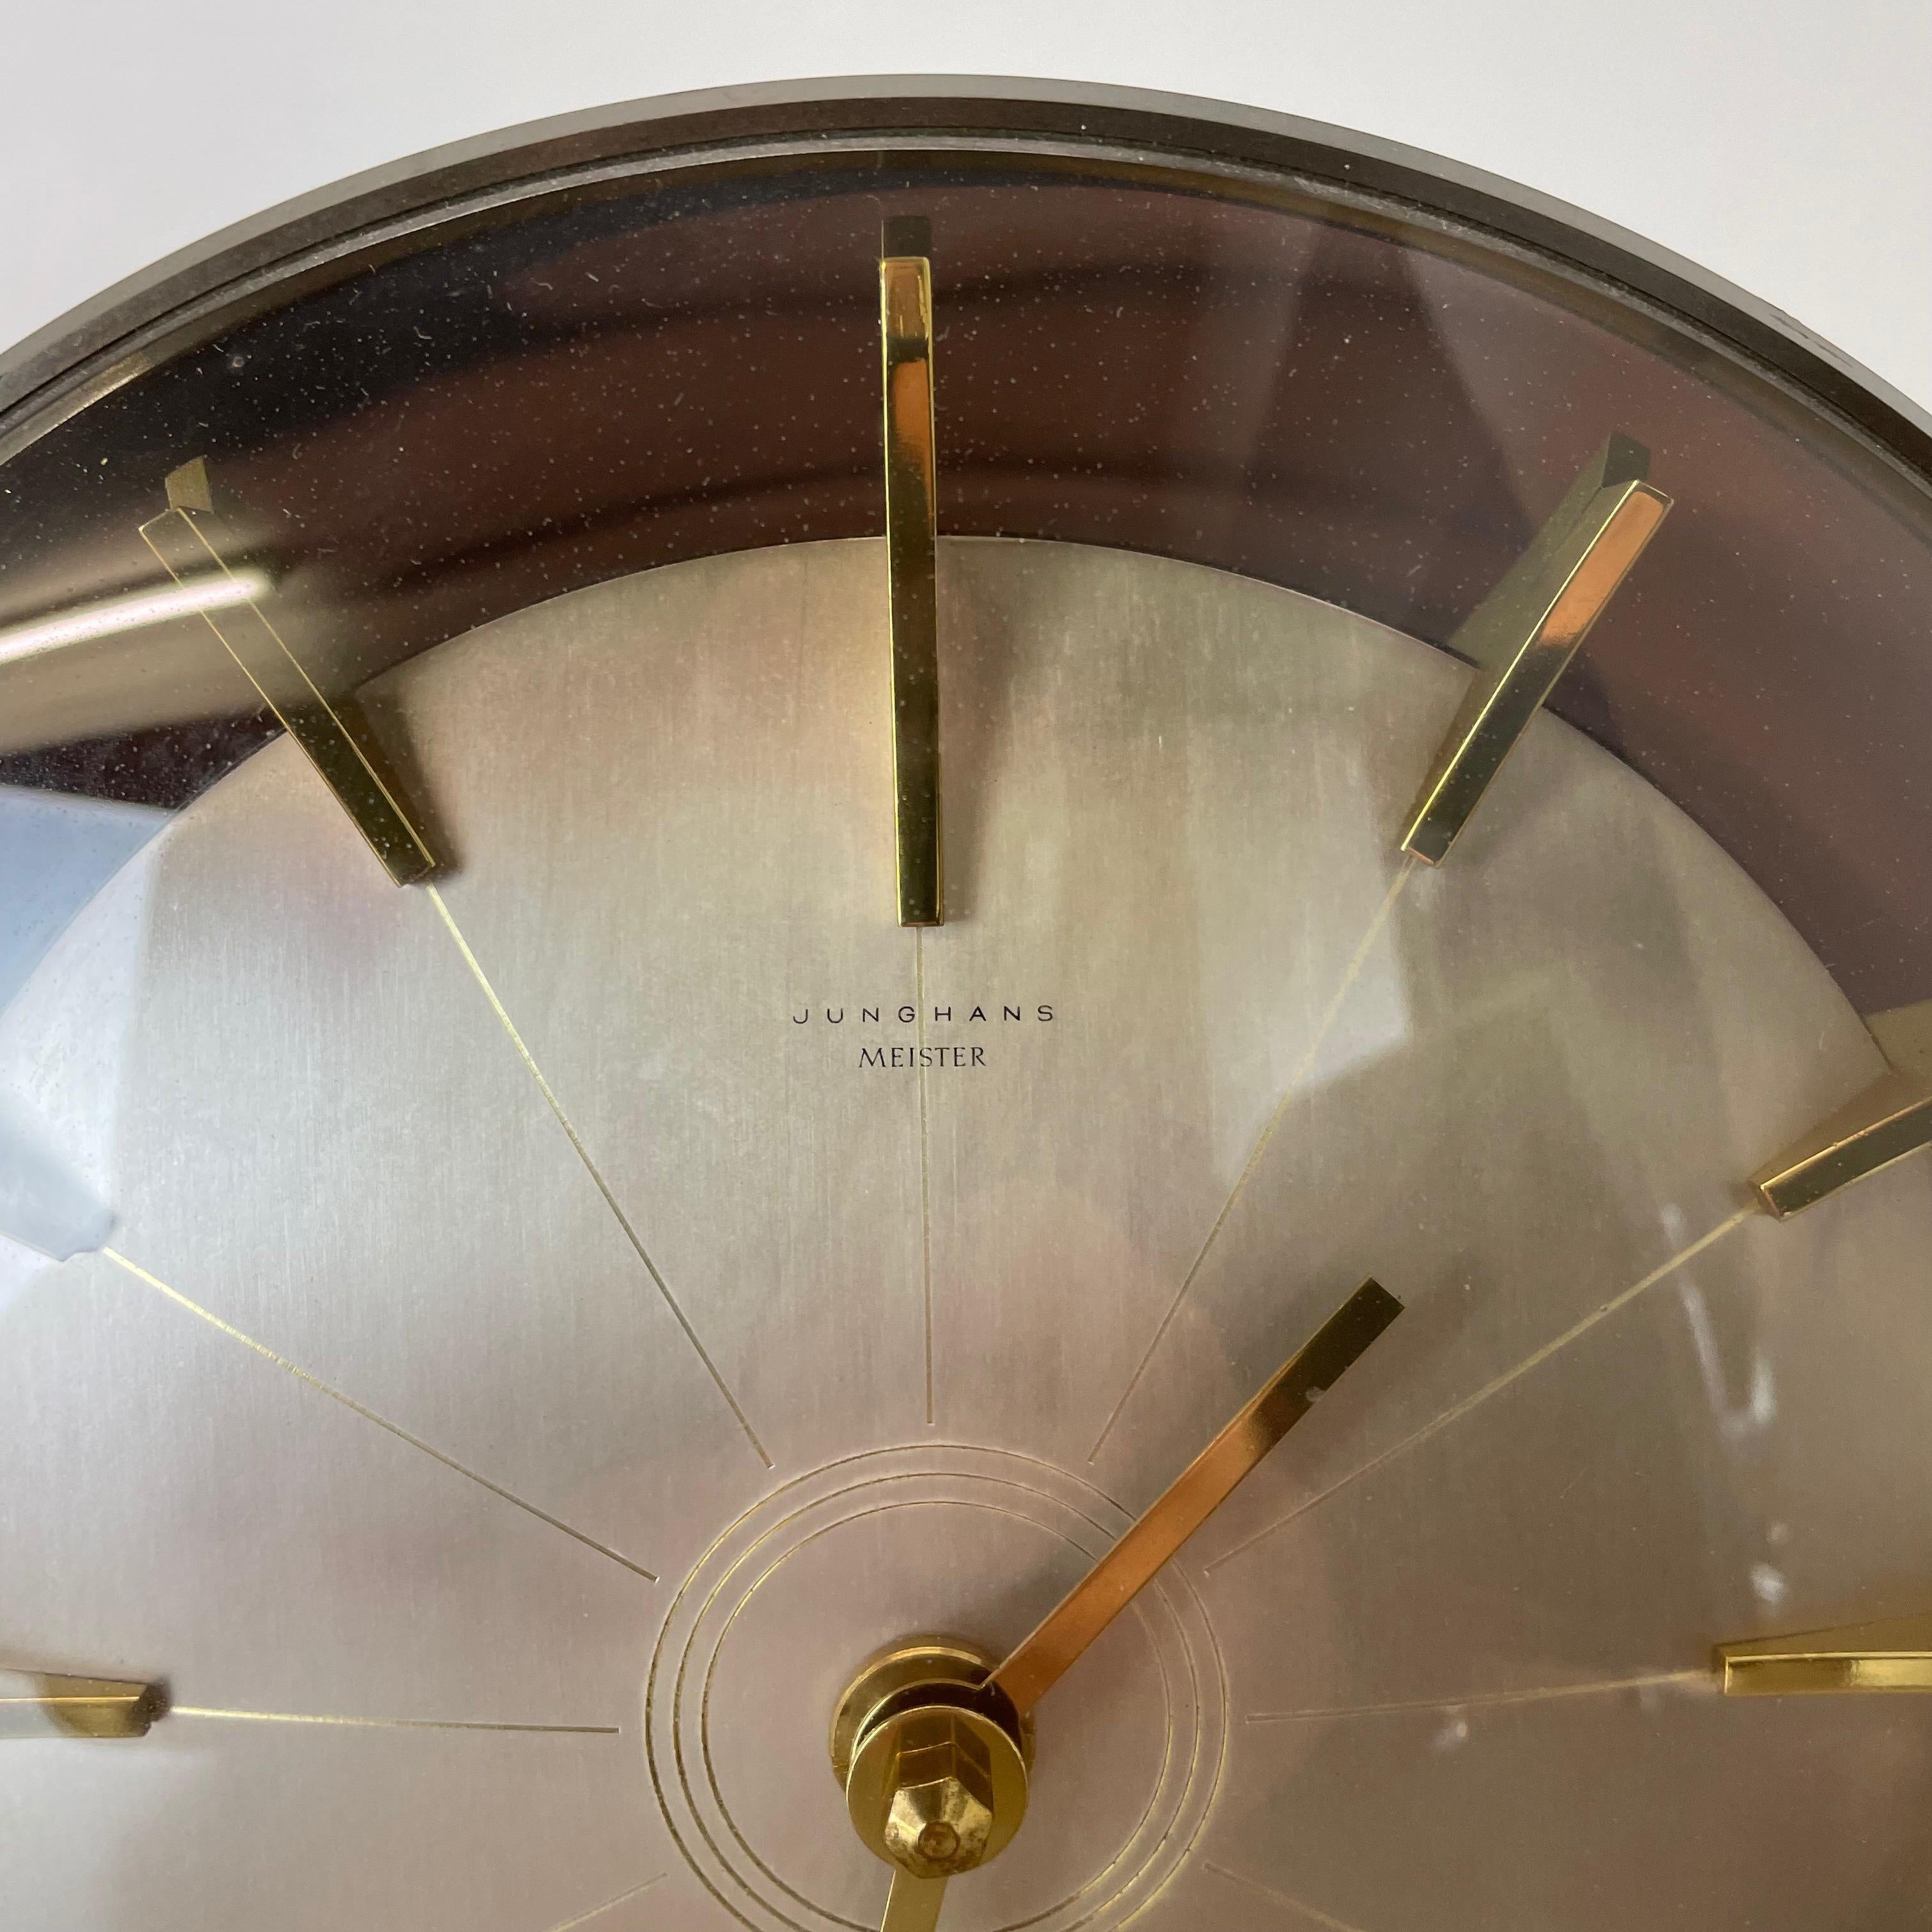 Vintage Hollywood Regency Brass Table Clock Junghans Meister, Germany, 1950s In Good Condition For Sale In Kirchlengern, DE